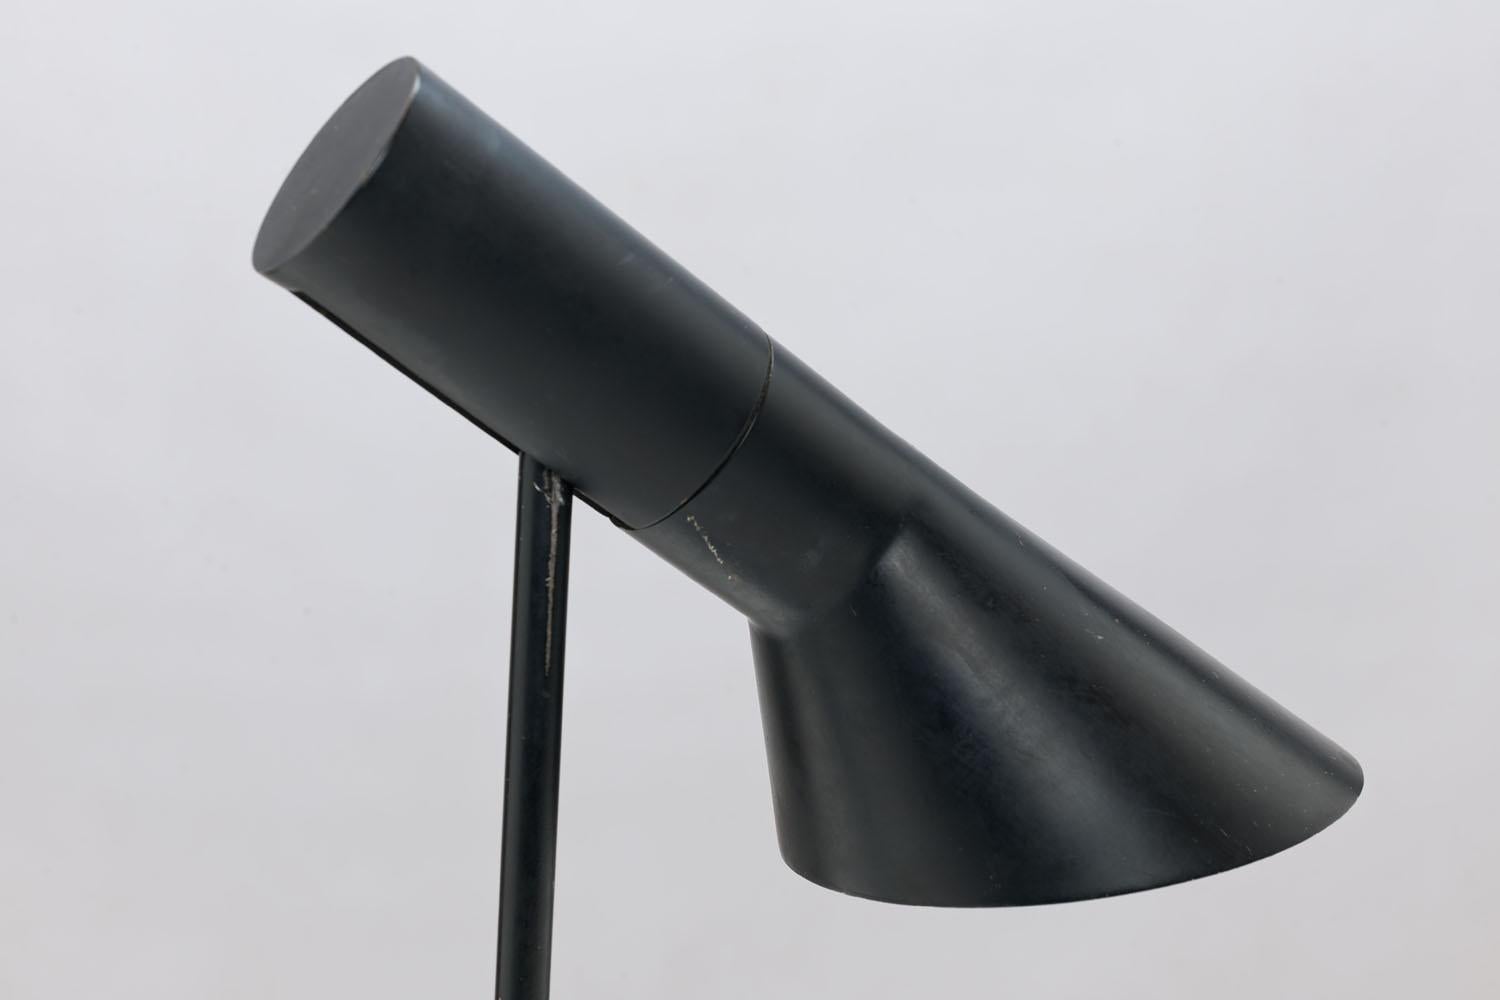 Early First Edition Black Arne Jacobsen AJ Visor Table Lamp by Louis Poulsen For Sale 3